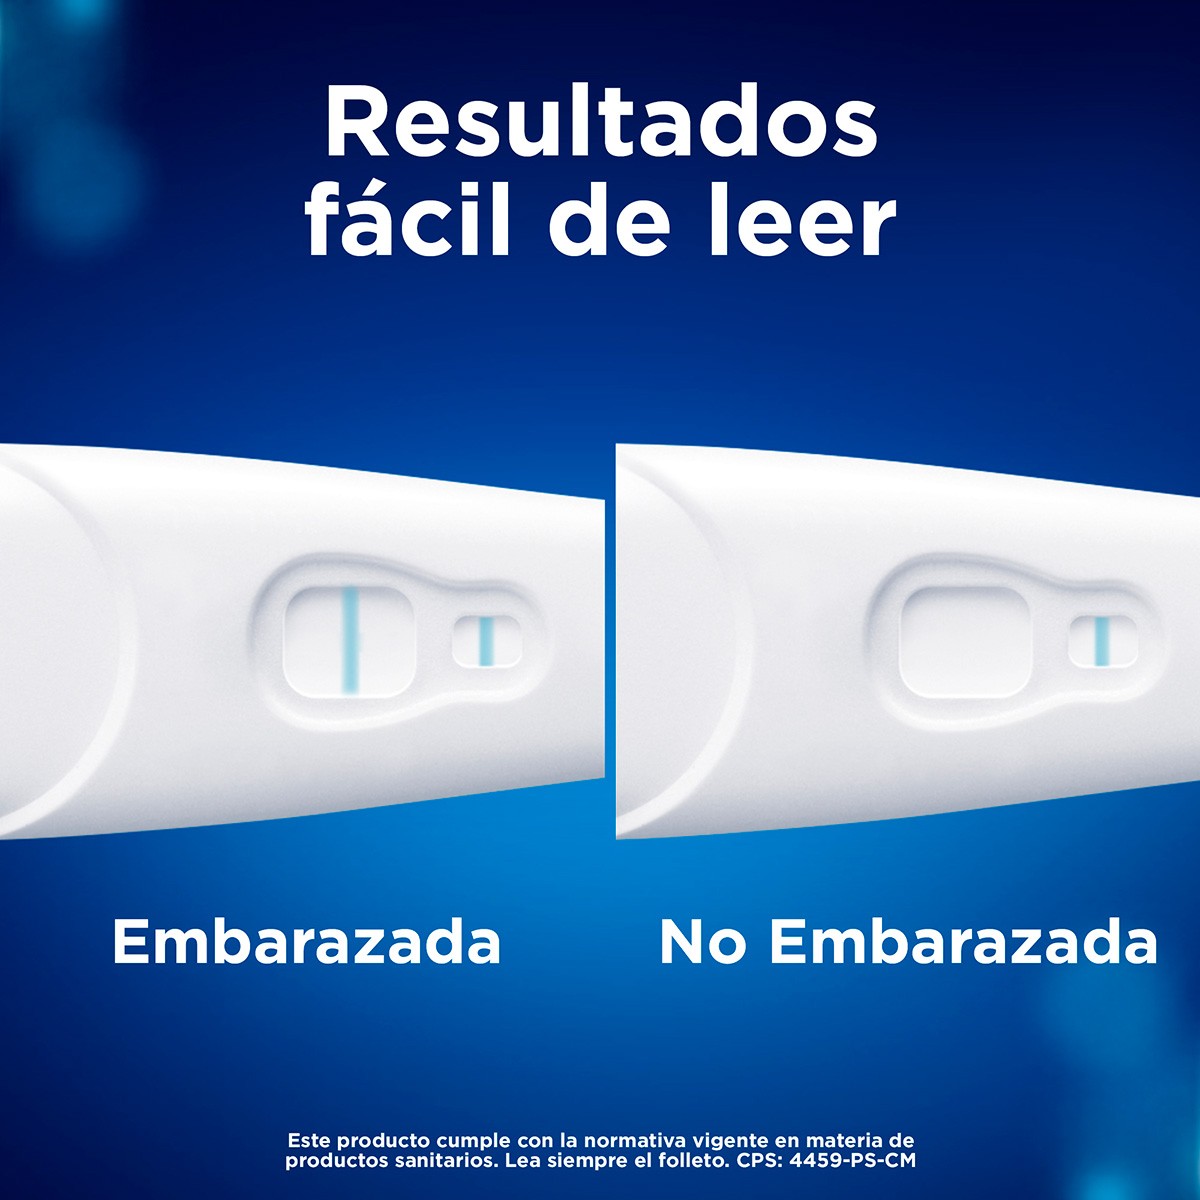 Clearblue test de embarazo early 1und